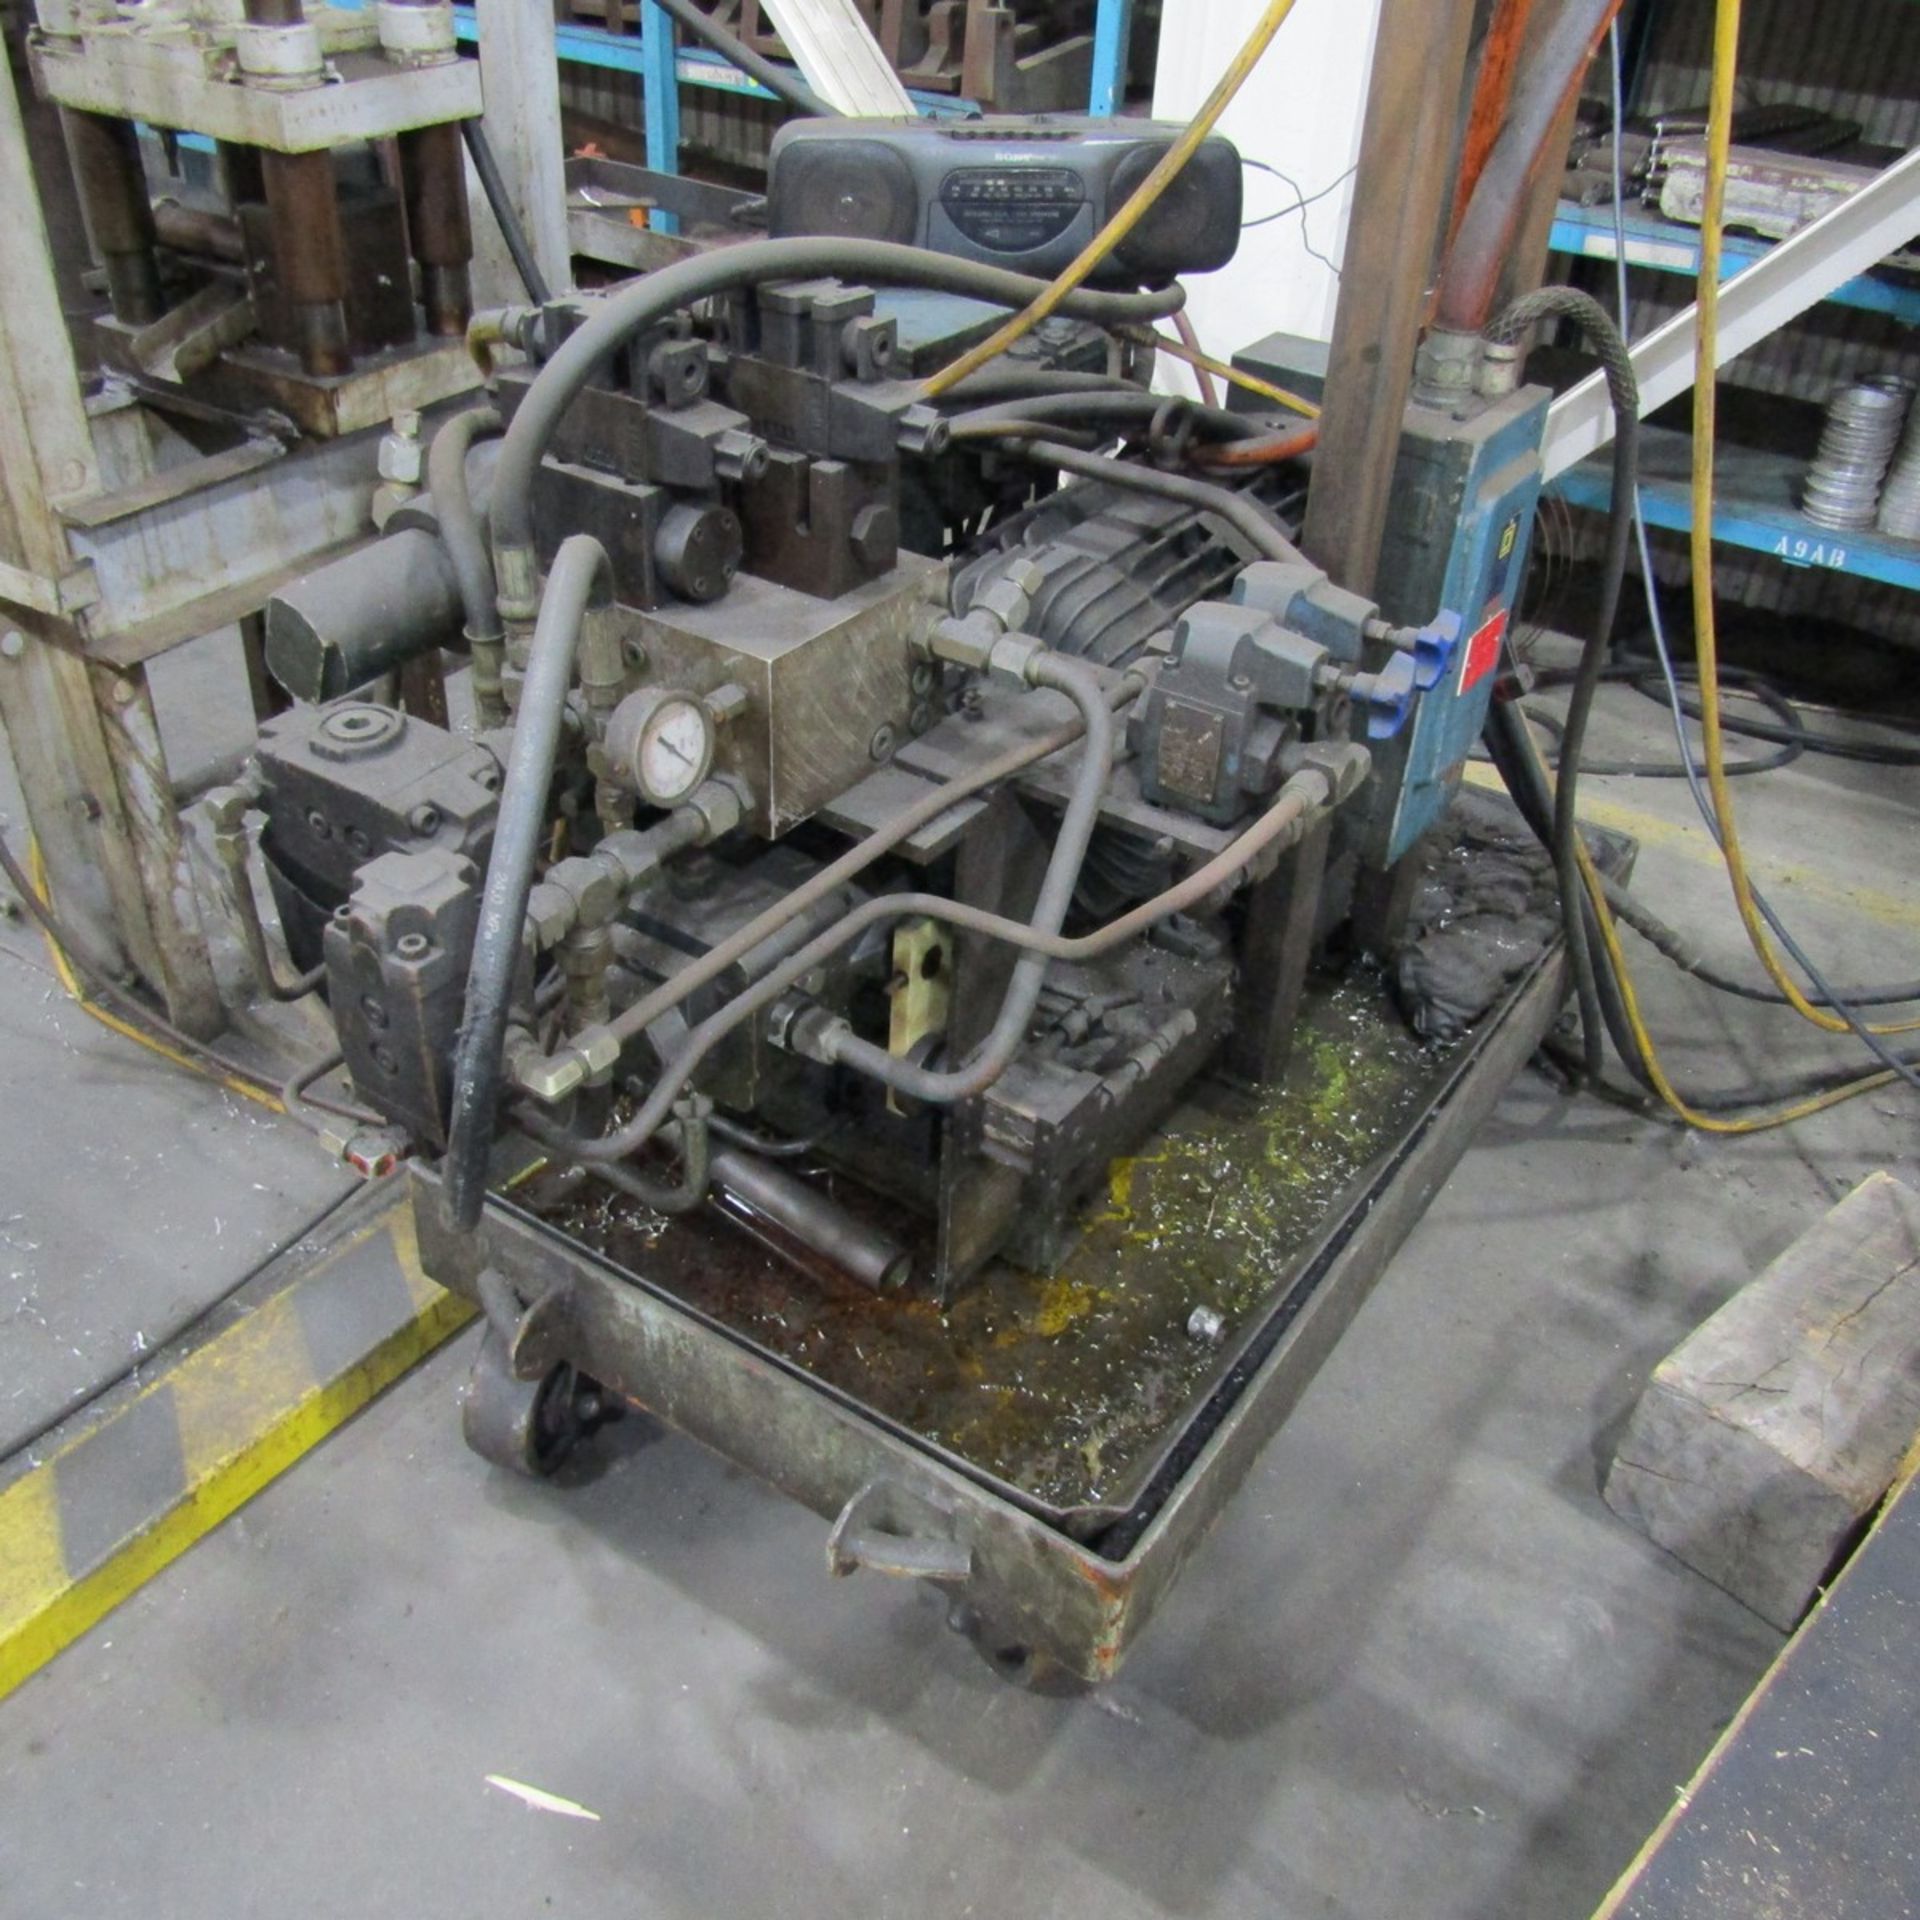 Tennals(?) 3,000 PSI Model HDZ-ME6-BR H-Frame Hydraulic Press, S/N: 30351; with Auxilliary Hydraulic - Image 4 of 4